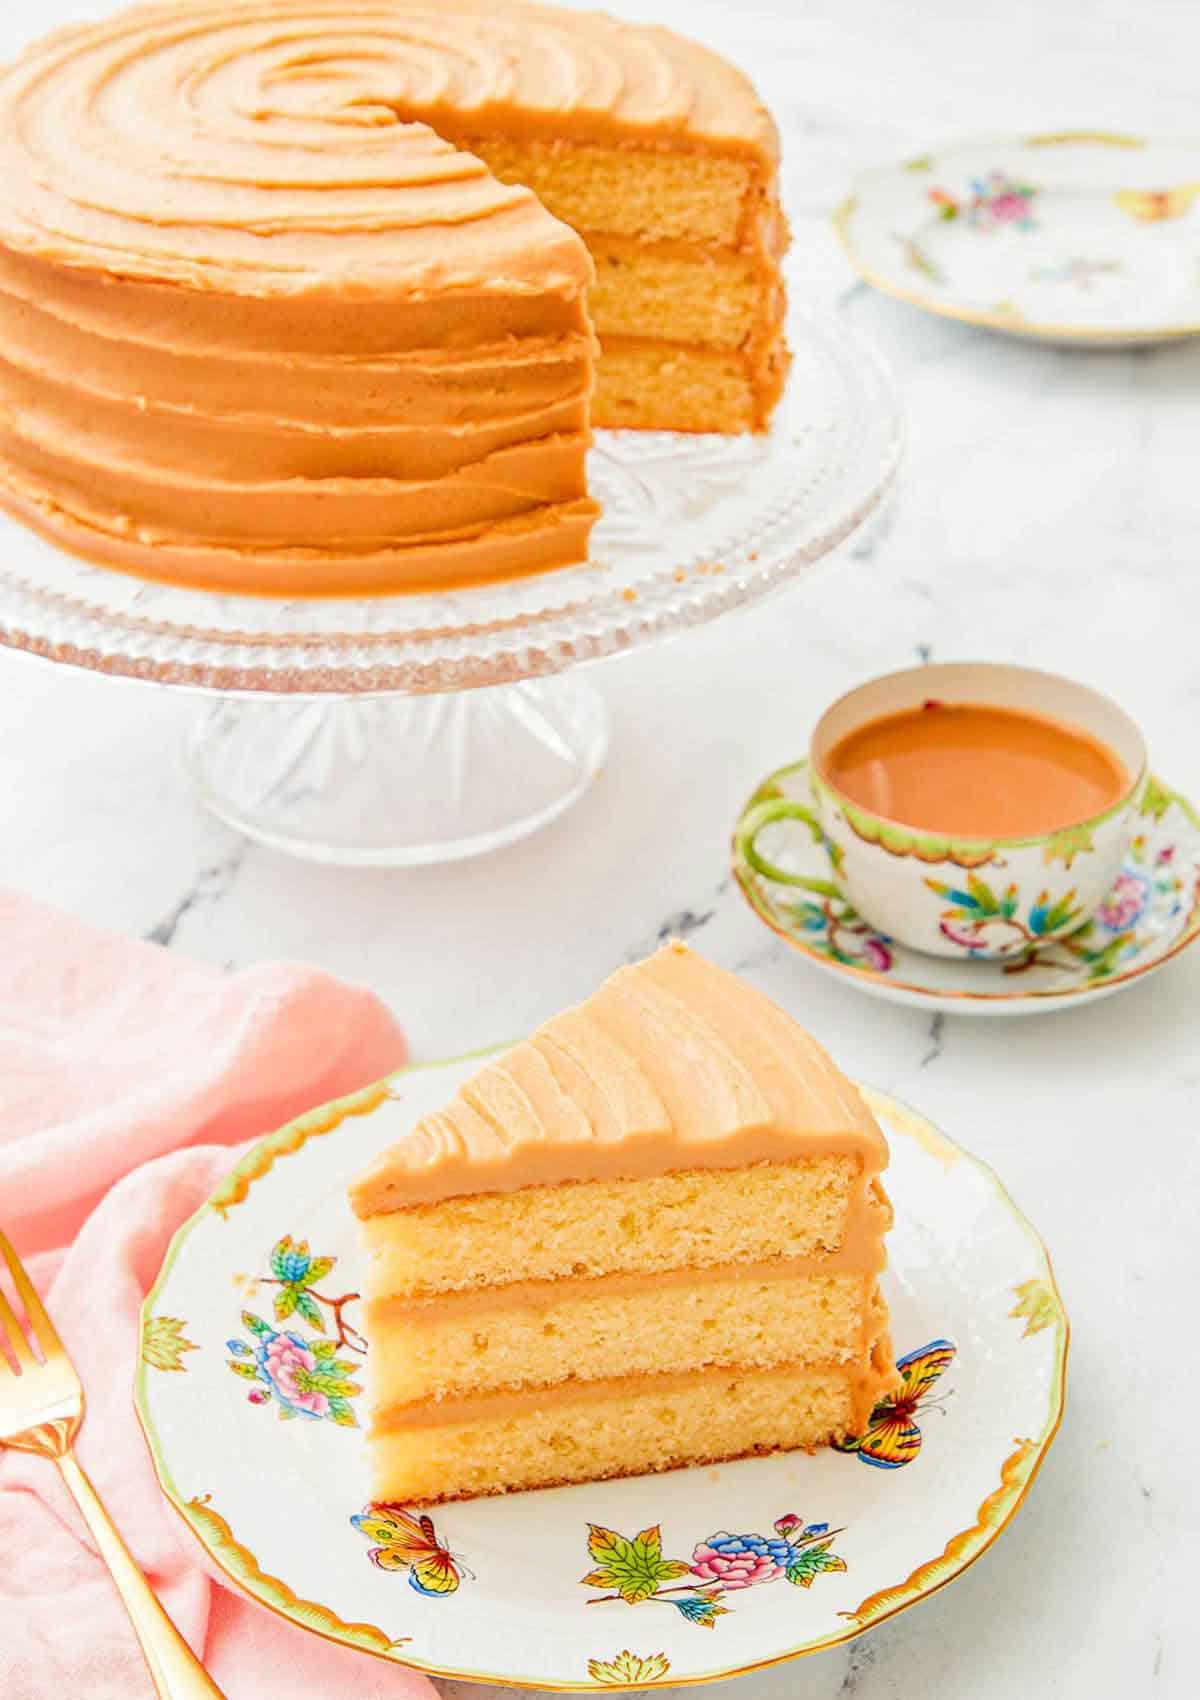 A slice of caramel cake on a plate with the rest of the cake on a stand in the background along with coffee.